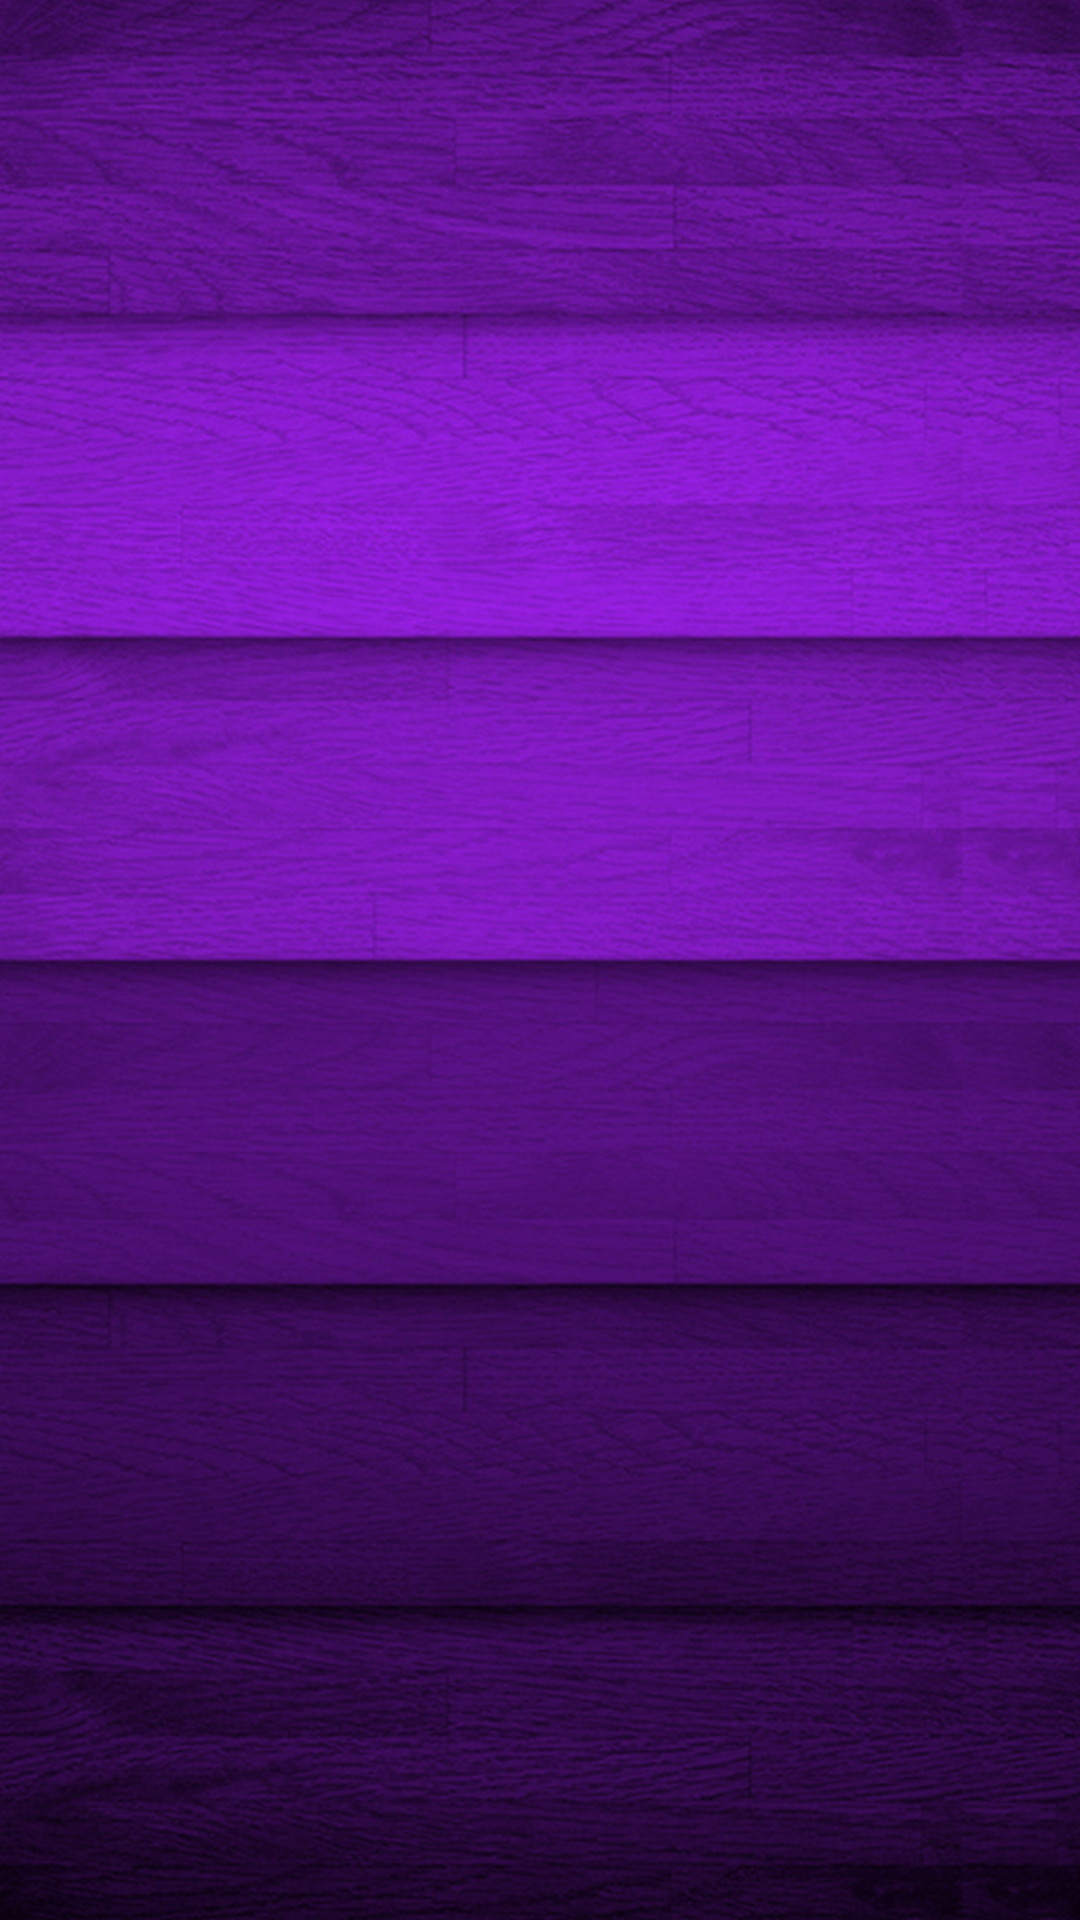 iPhone Wallpaper HD Purple With high-resolution 1080X1920 pixel. You can use this wallpaper for your iPhone 5, 6, 7, 8, X, XS, XR backgrounds, Mobile Screensaver, or iPad Lock Screen